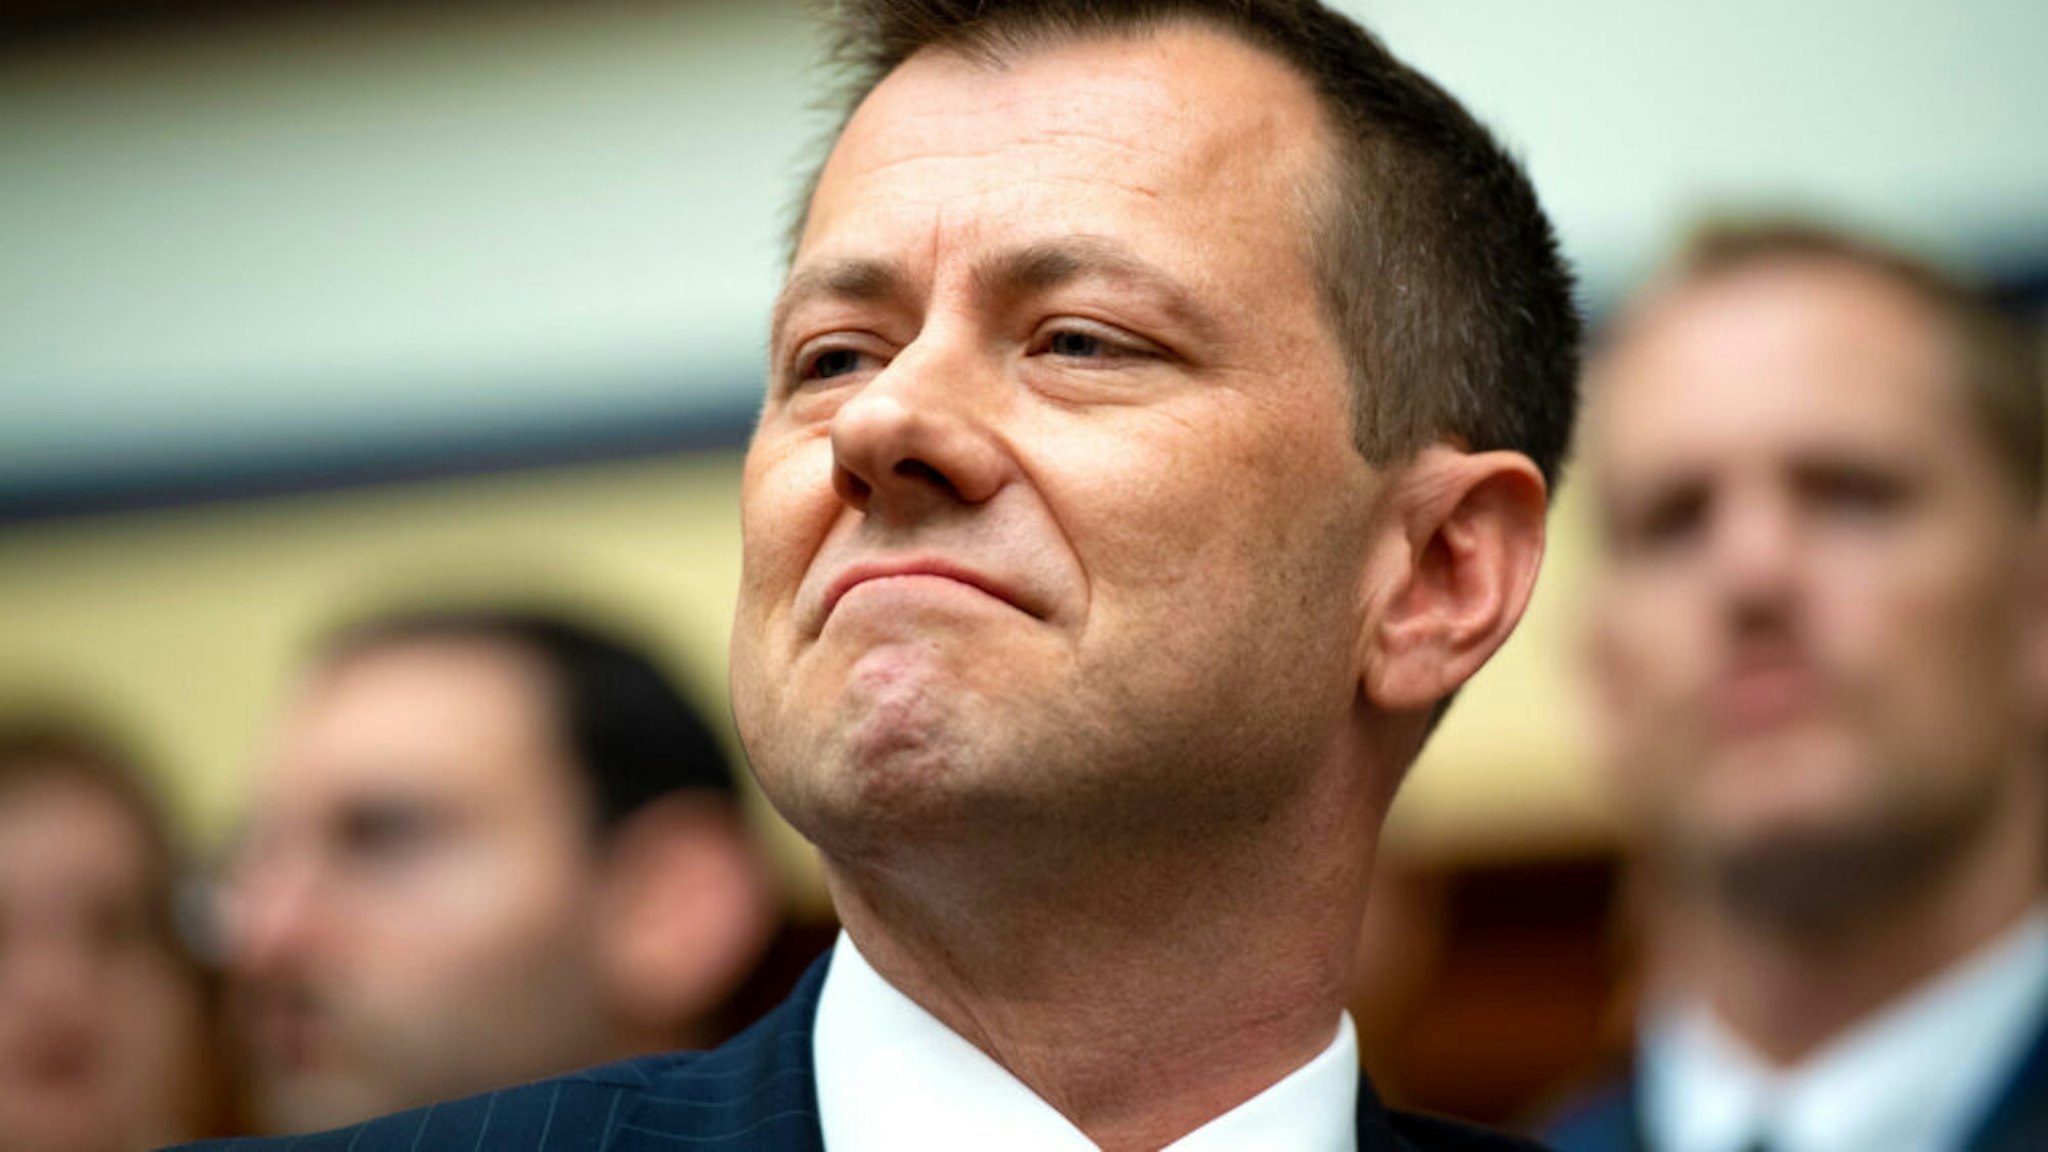 Deputy Assistant FBI Director Peter Strzok testifies on FBI and Department of Justice actions during the 2016 Presidential election during a House Joint committee hearing on Capitol Hill in Washington, DC, July 12, 2018. - An FBI agent assailed as biased by Donald Trump after it emerged he railed against the president in private messages with his lover, said Thursday such attacks are bolstering Russia's Vladimir Putin and tearing the United States apart. Ahead of a congressional hearing on alleged anti-Trump bias in the Federal Bureau of Investigation, Peter Strzok denied assertions that the investigation into Russian meddling in the 2016 election was a politicized probe targeting the president.